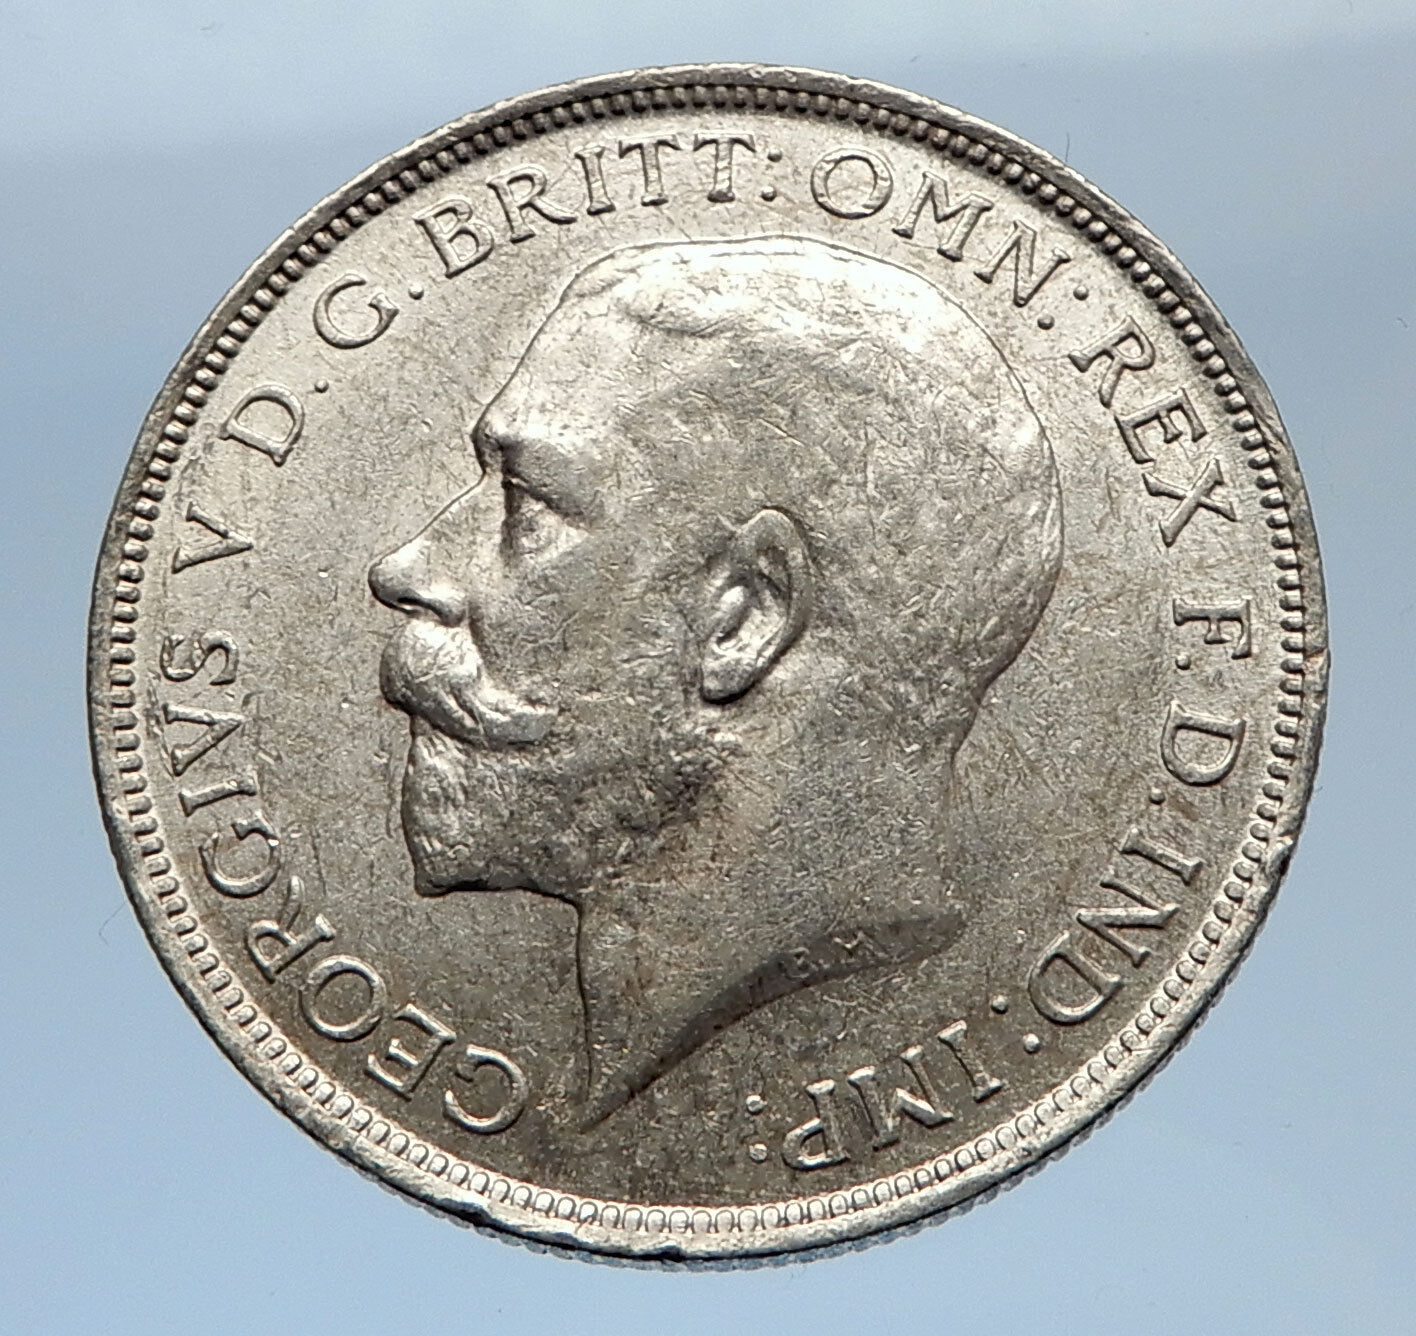 1917 United Kingdom Great Britain GEORGE V Silver Florin 2 Shillings Coin i69415